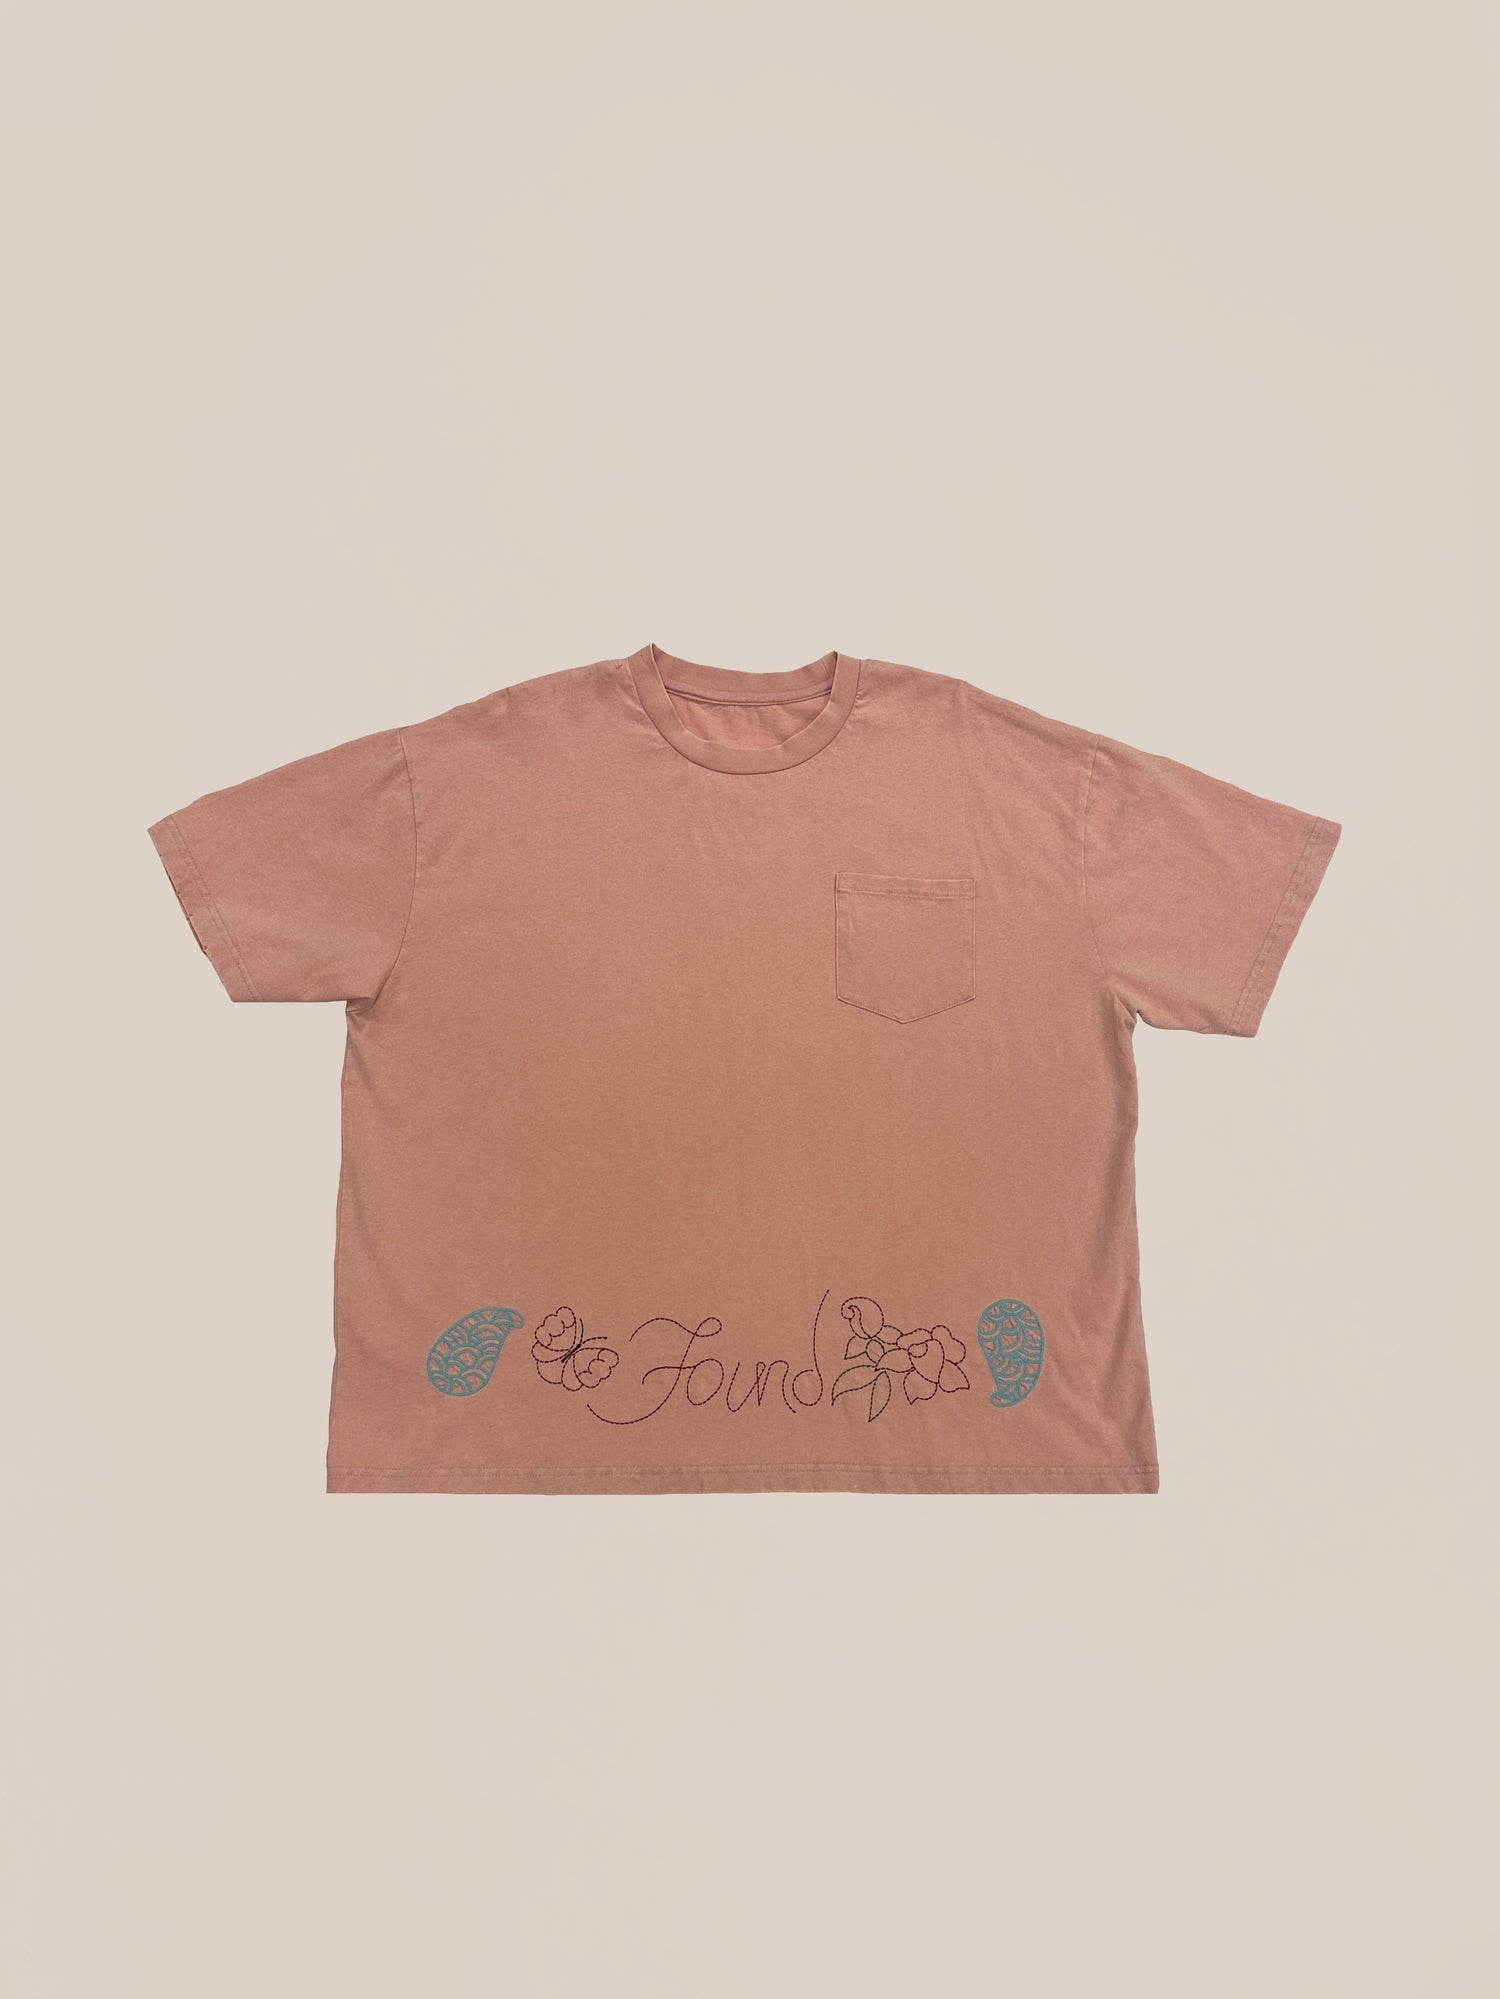 A terracotta-colored, 100% Cotton Sample 80 (Salmon Tee) t-shirt by Profound with decorative graphics and text at the bottom front.